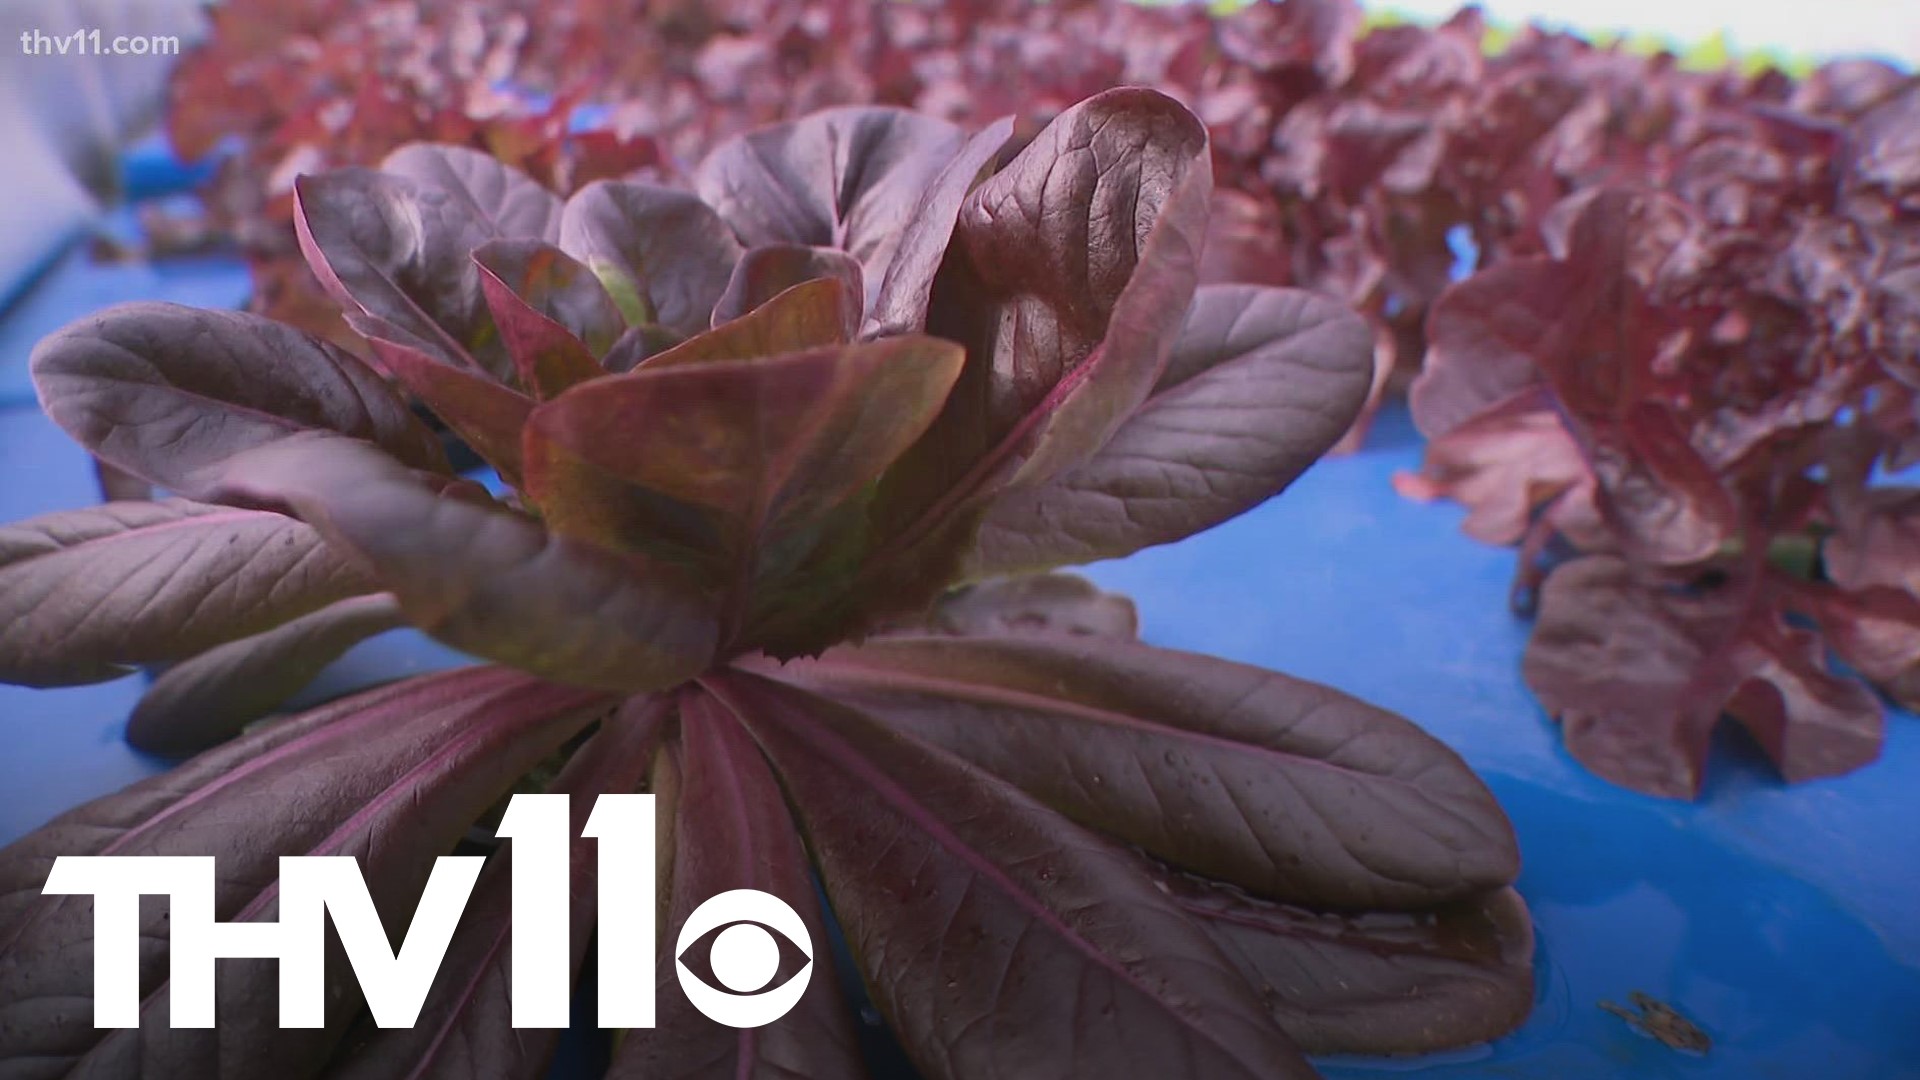 The Nurserie in Little Rock is one of the only hydroponic farms in the state. This type of farming allows plants to grow without soil.